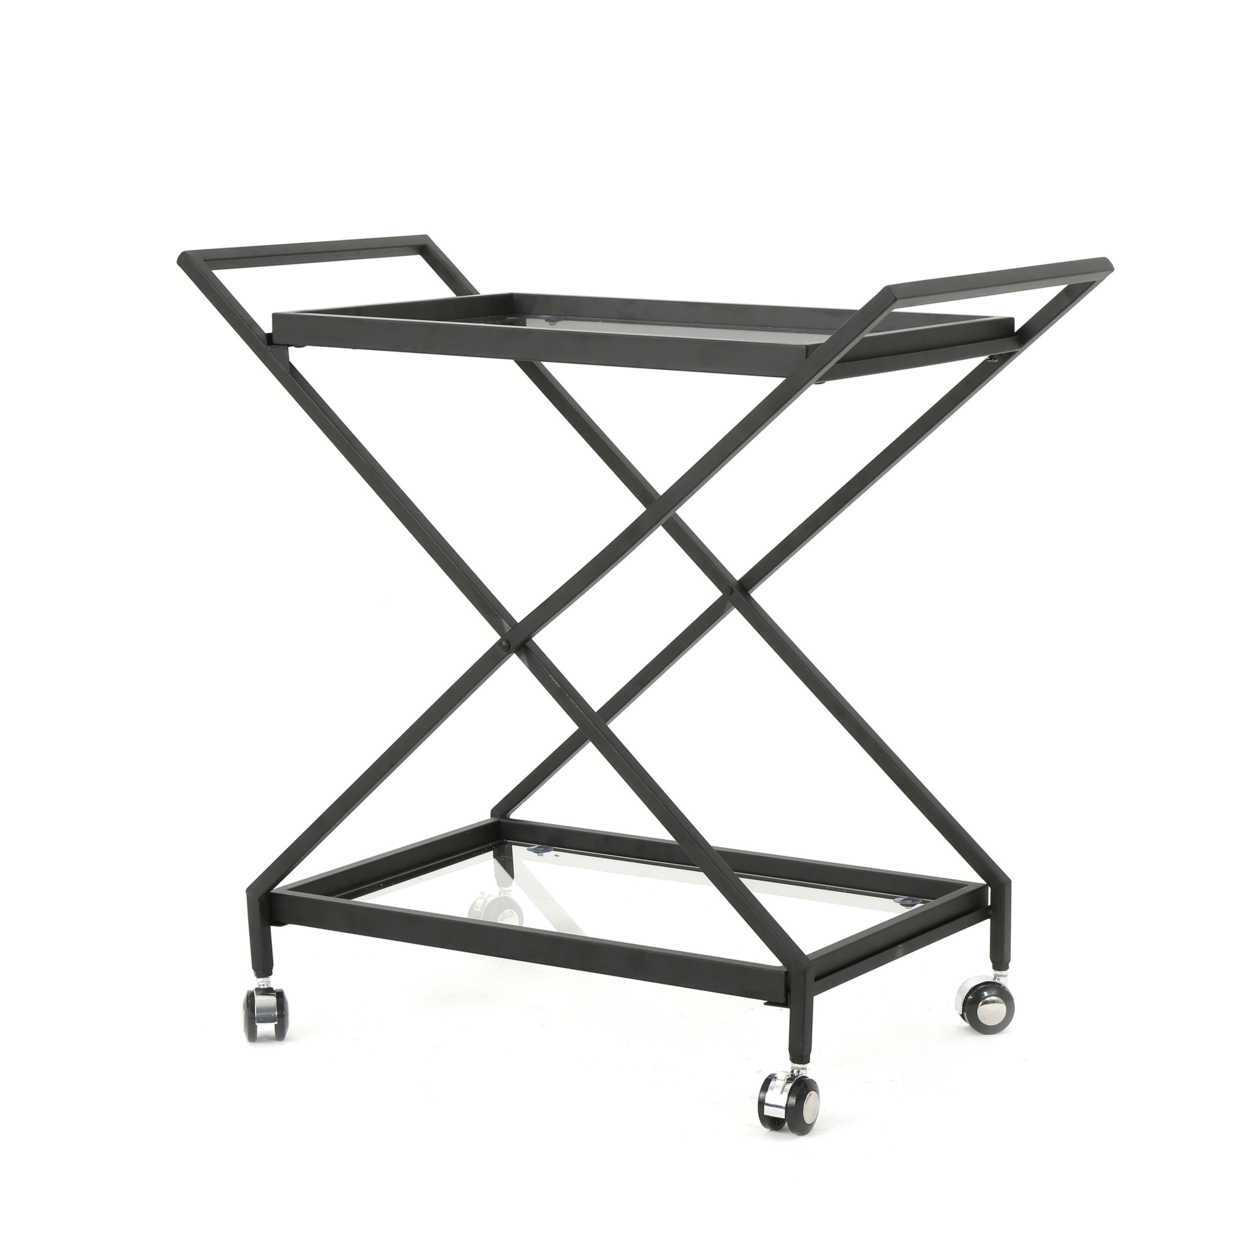 Annika Outdoor Black Powder Coated Iron Bar Cart With Tempered Glass Shelves